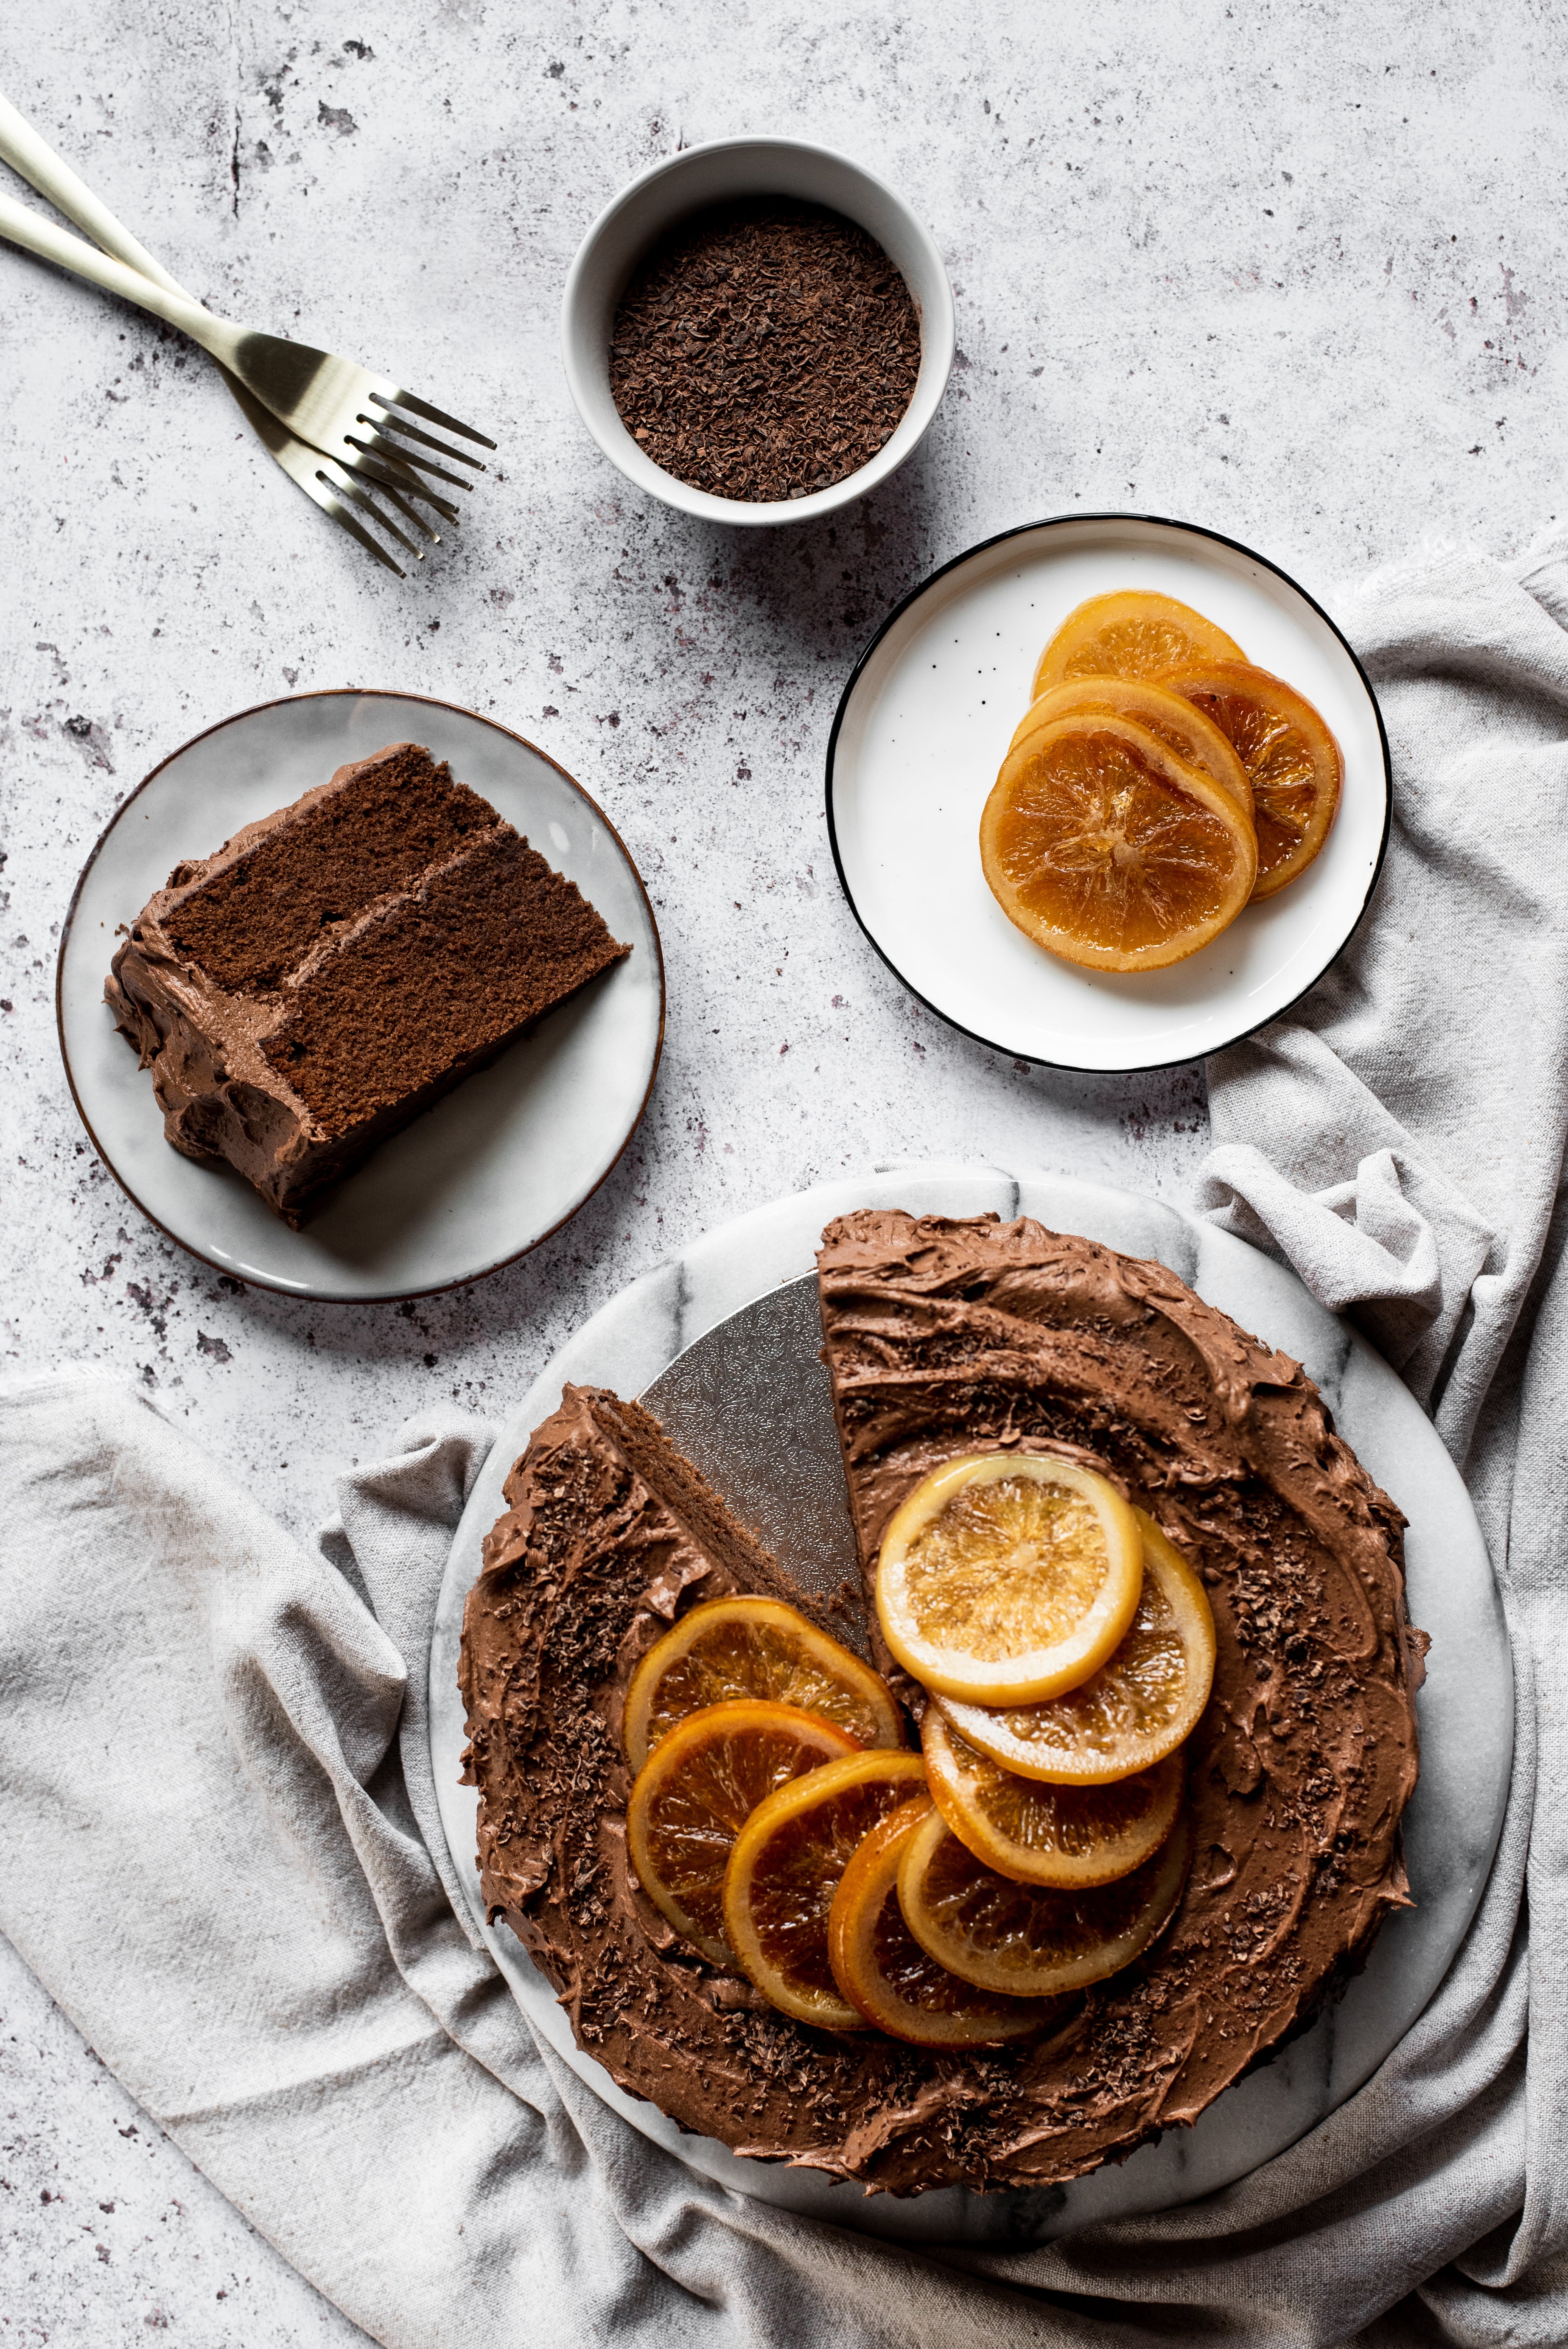 birds eye view of chocolate cake with orange slices on top with a slice taken out